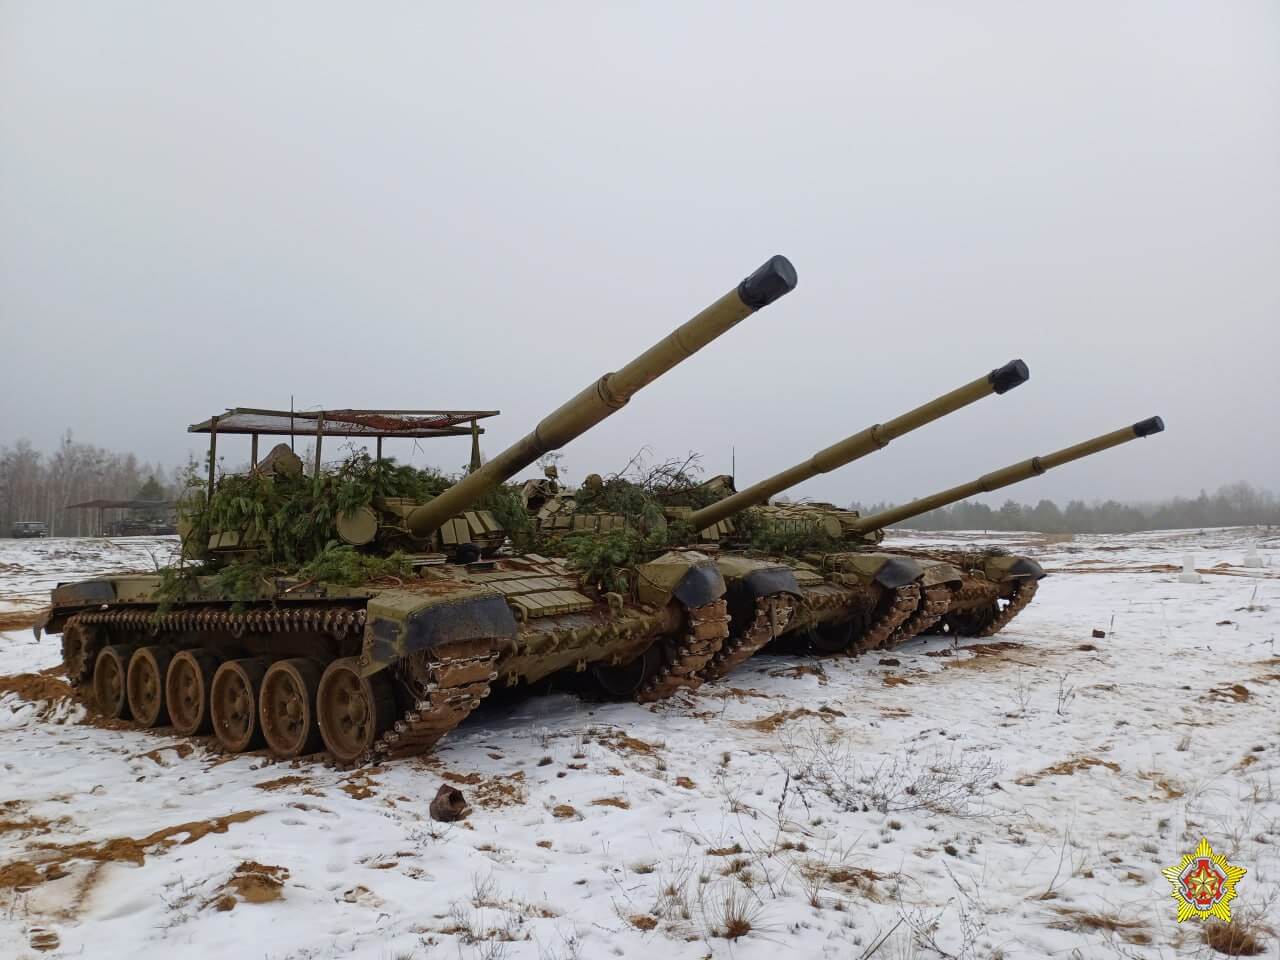 Review of military events in Belarus on December 11-17